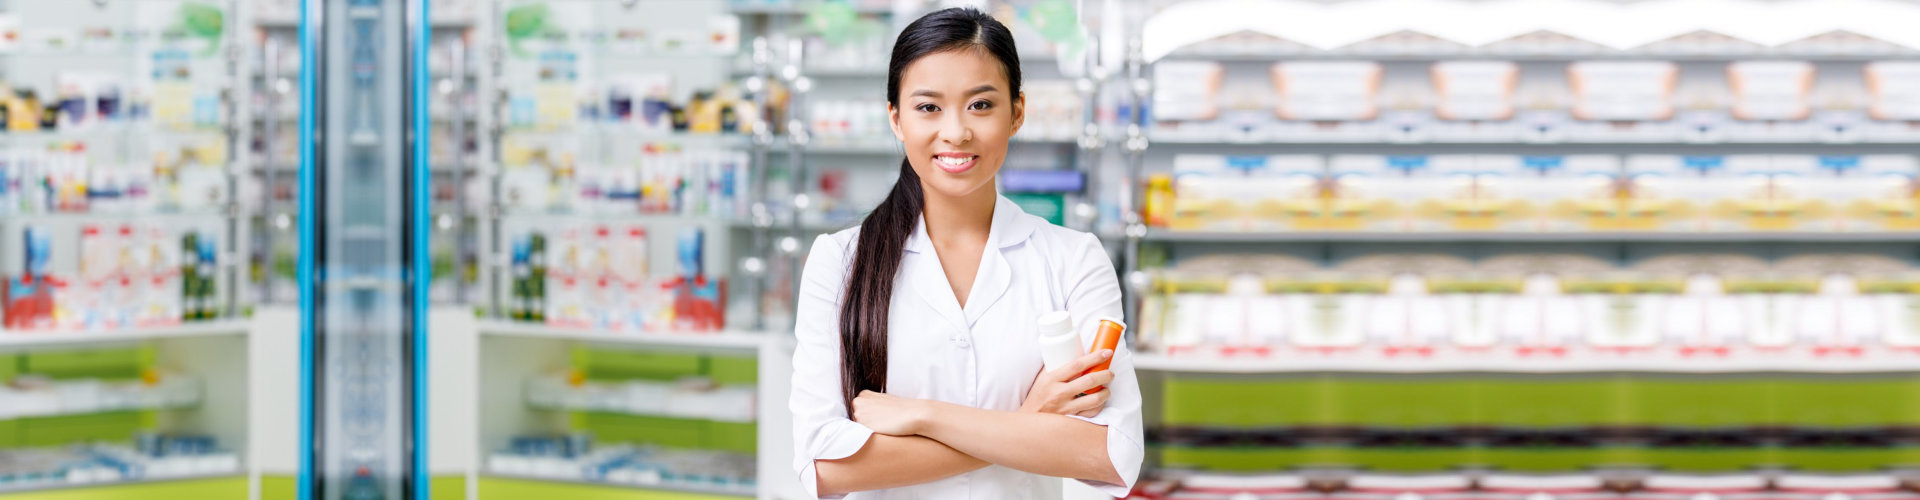 pharmacist standing and smiling